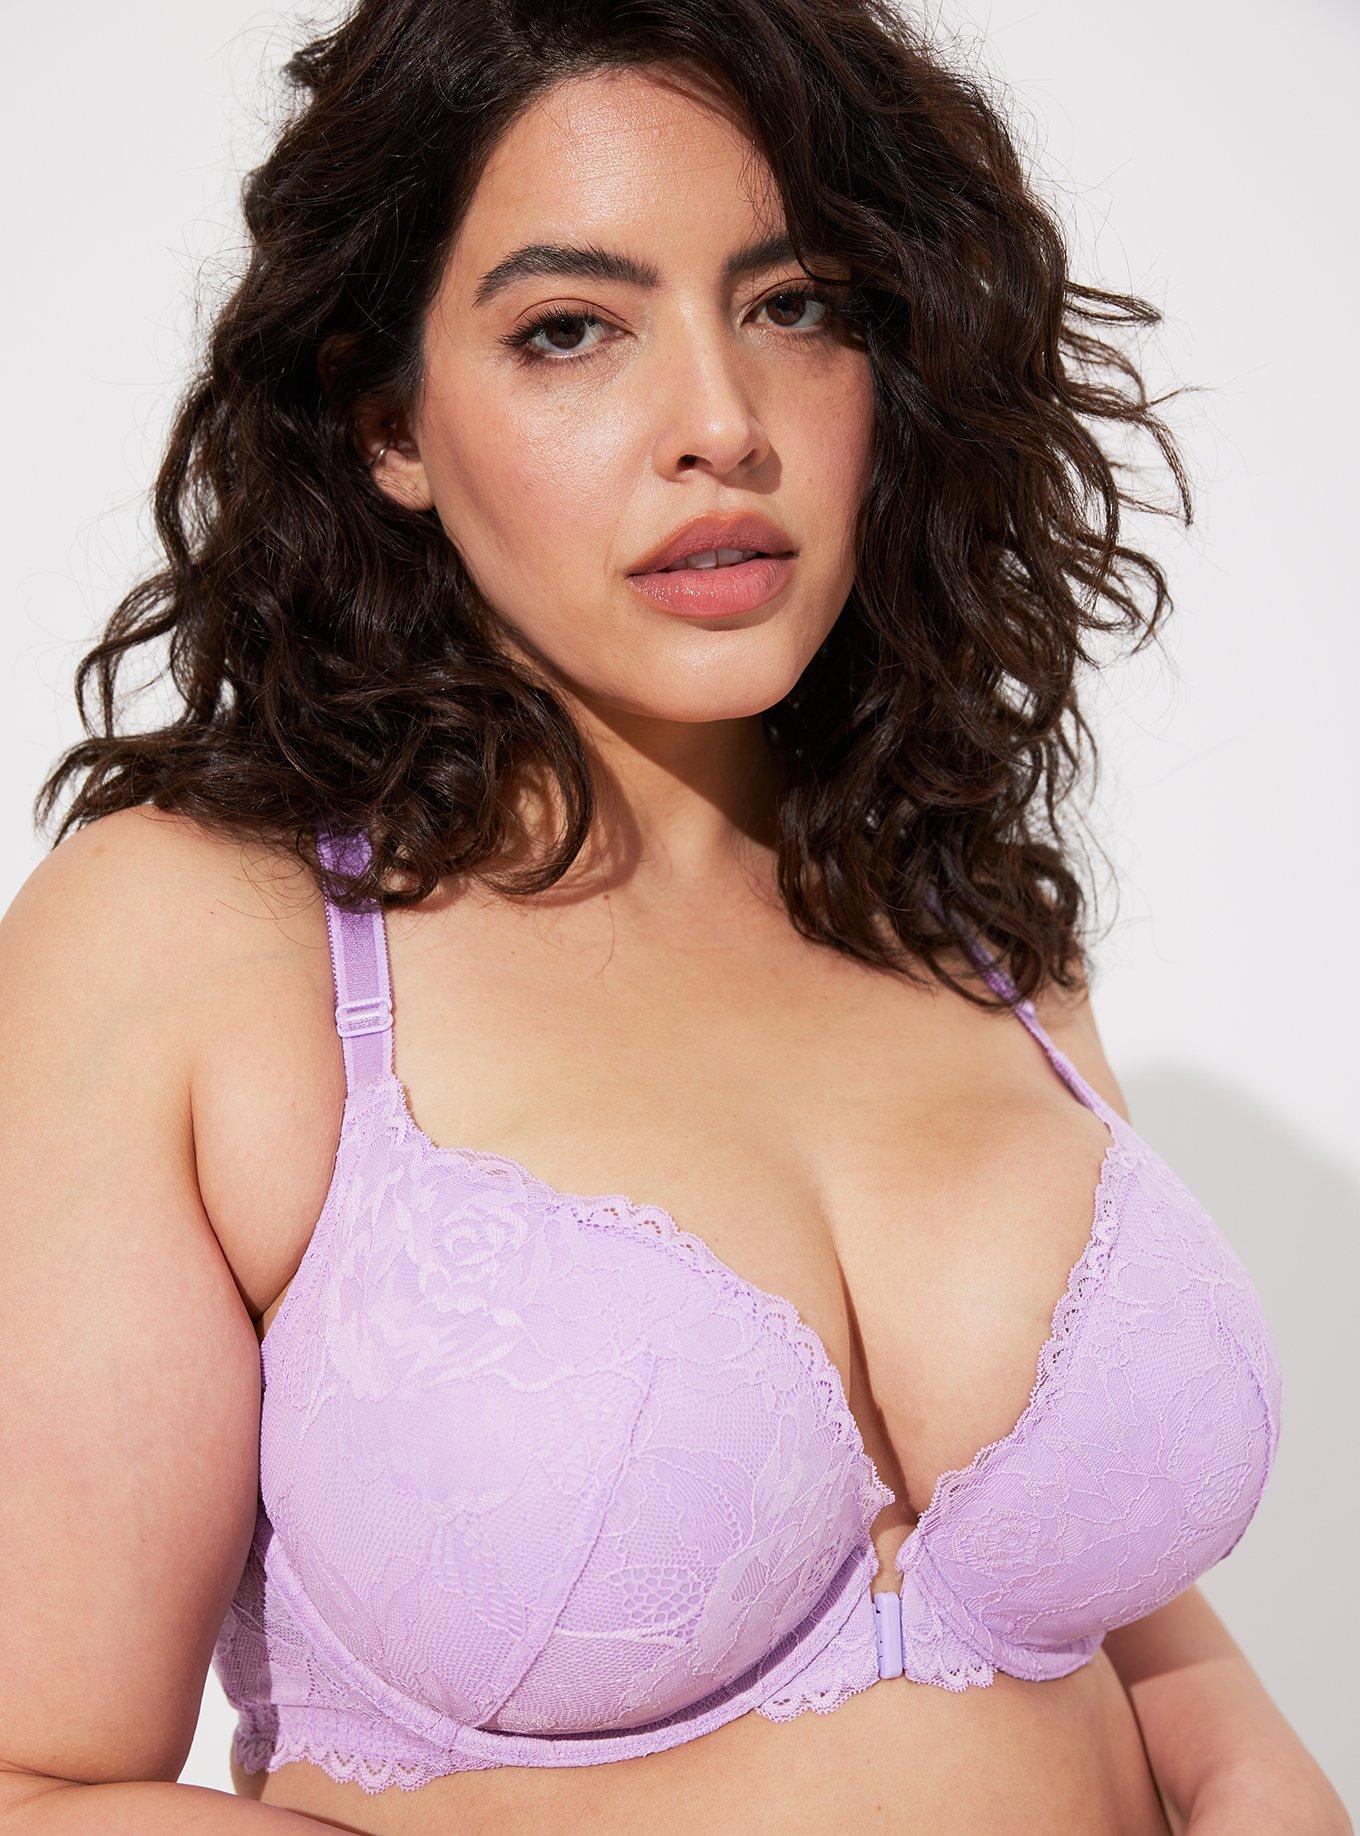 Torrid Curve Size 44DDD Underwire Push Up Sexy Bra in Blue Shooting Stars